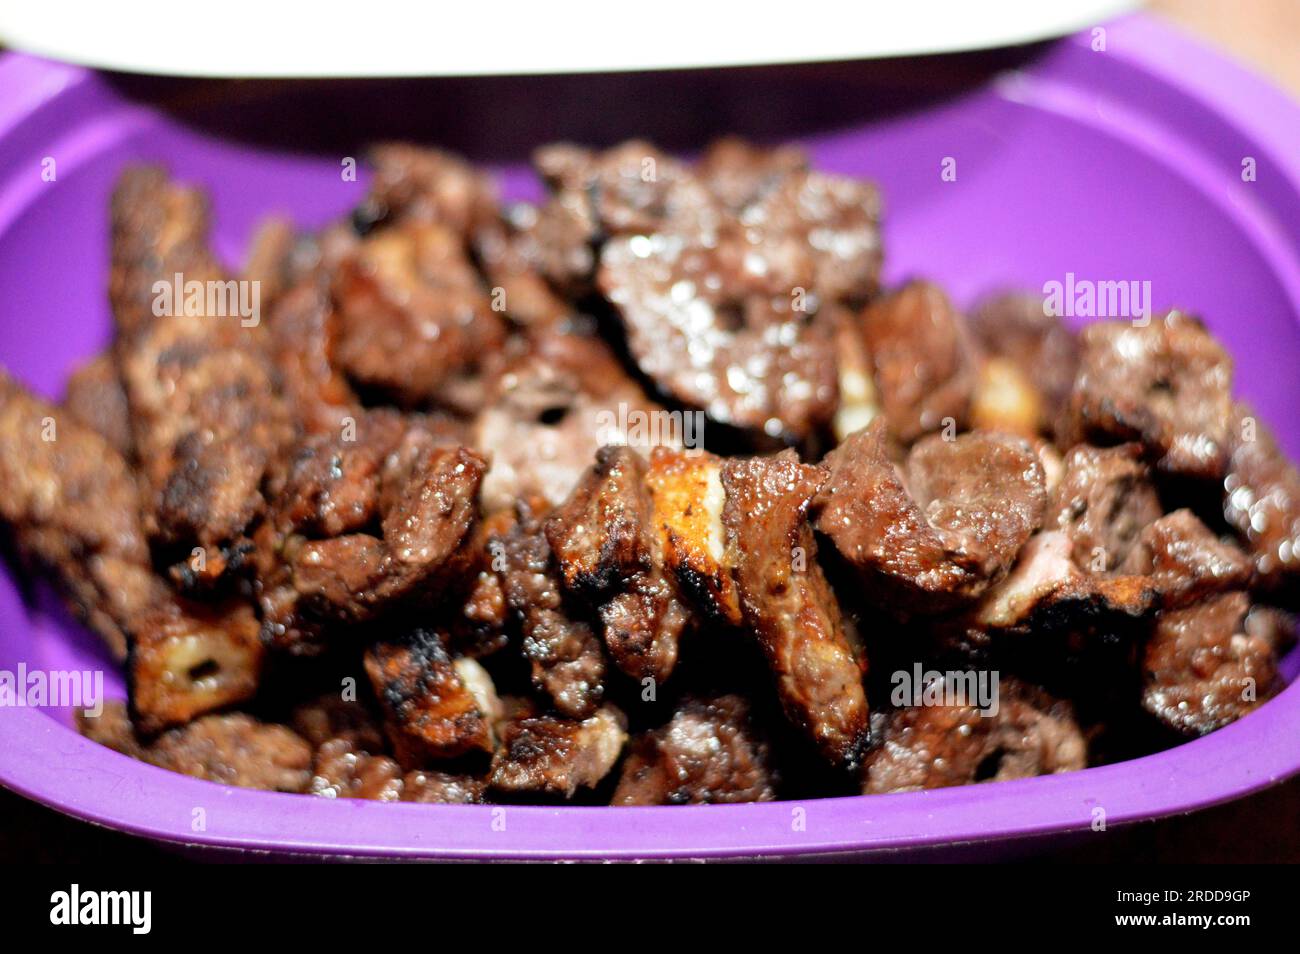 Kebab kebap, kabob, kebap or kabab is a type of cooked meat dish, originates from cuisines of the Middle East, grilled cut meat pieces on charcoal ket Stock Photo